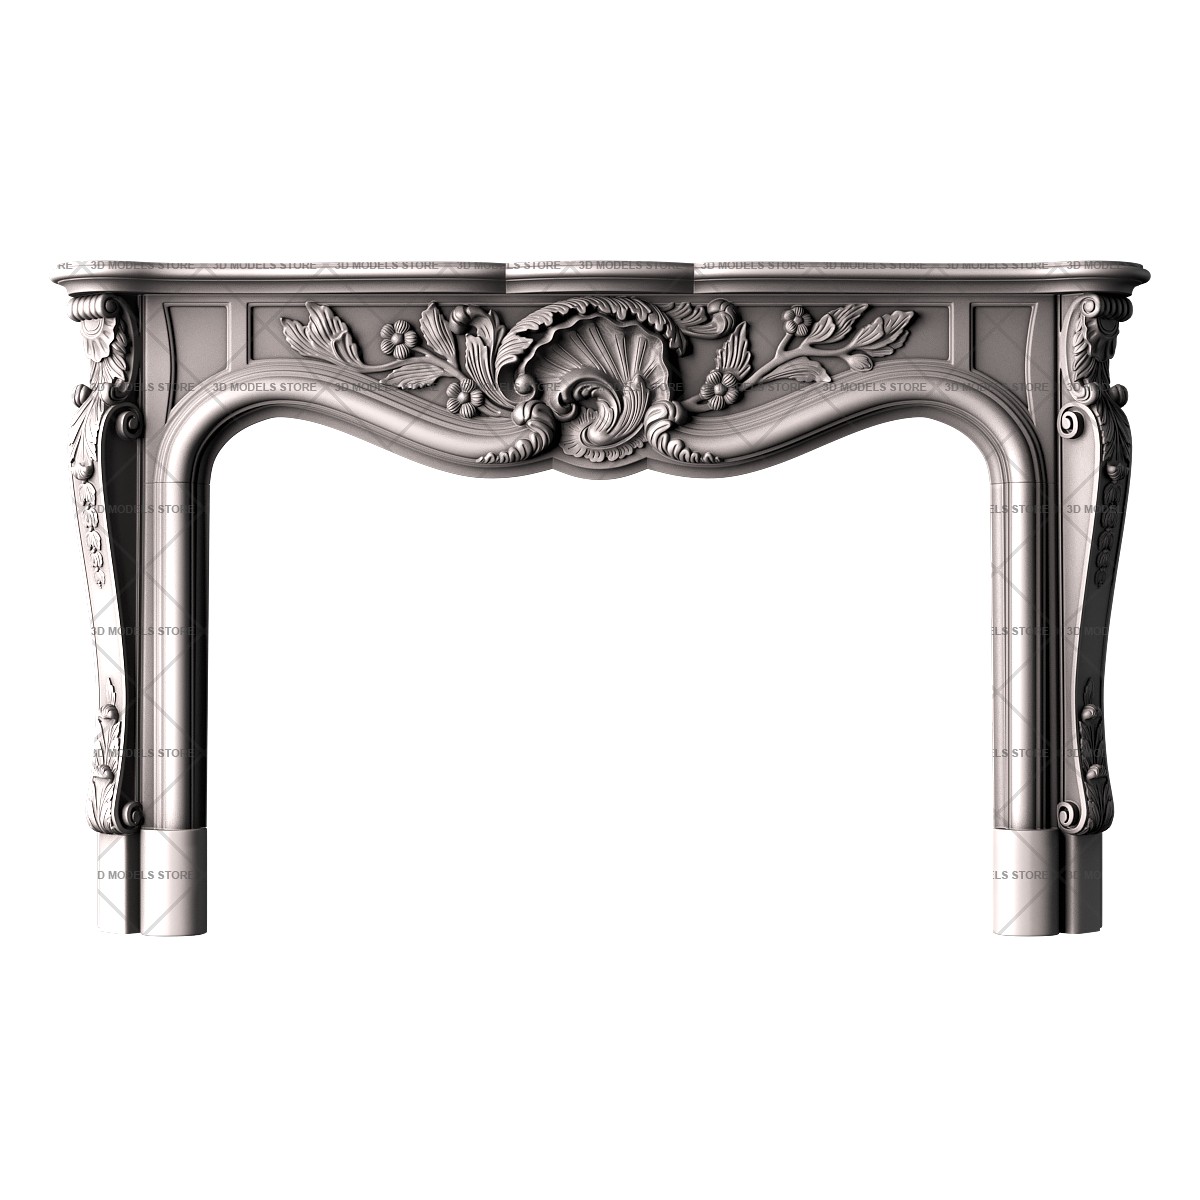 Fireplace with carved elements, 3d models (stl)